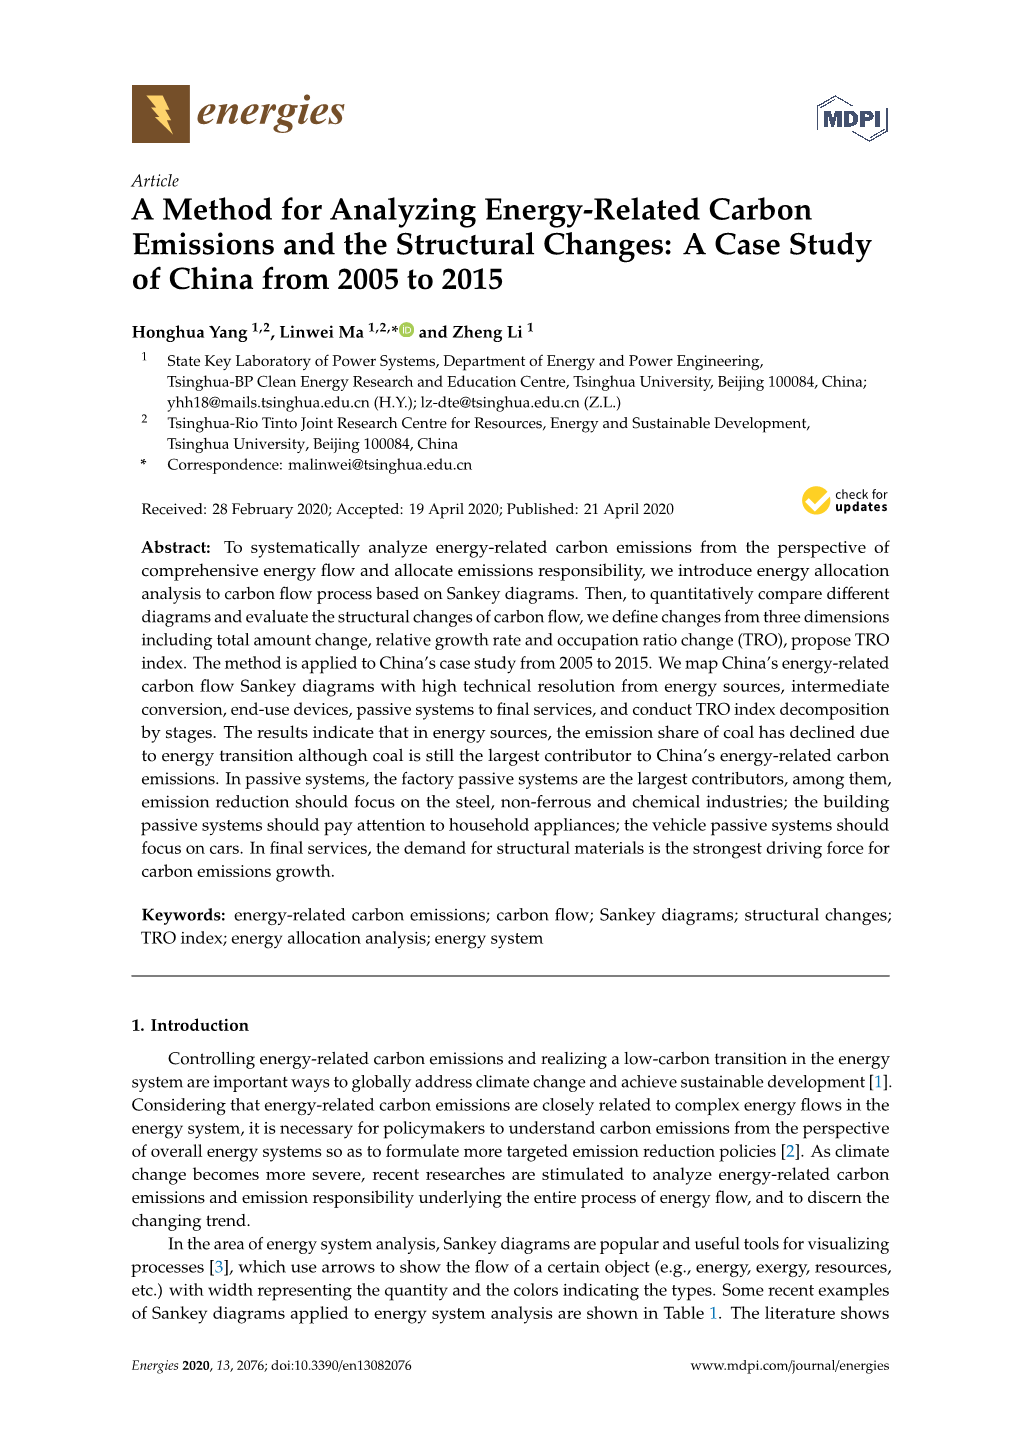 A Method for Analyzing Energy-Related Carbon Emissions and the Structural Changes: a Case Study of China from 2005 to 2015